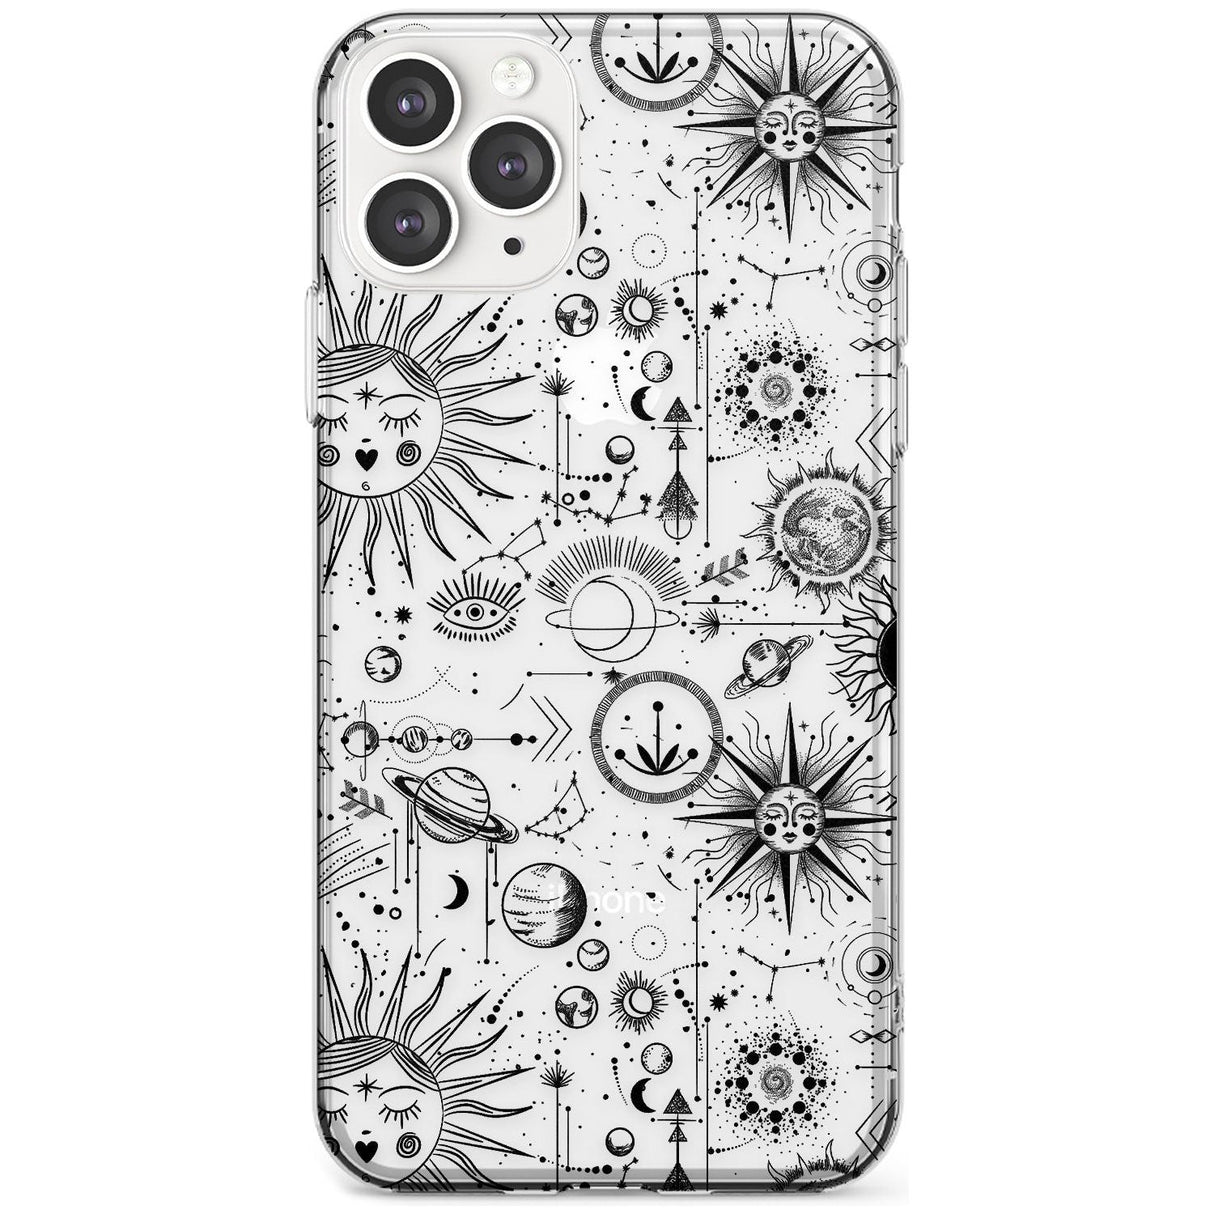 Suns & Planets Vintage Astrological Slim TPU Phone Case for iPhone 11 Pro Max